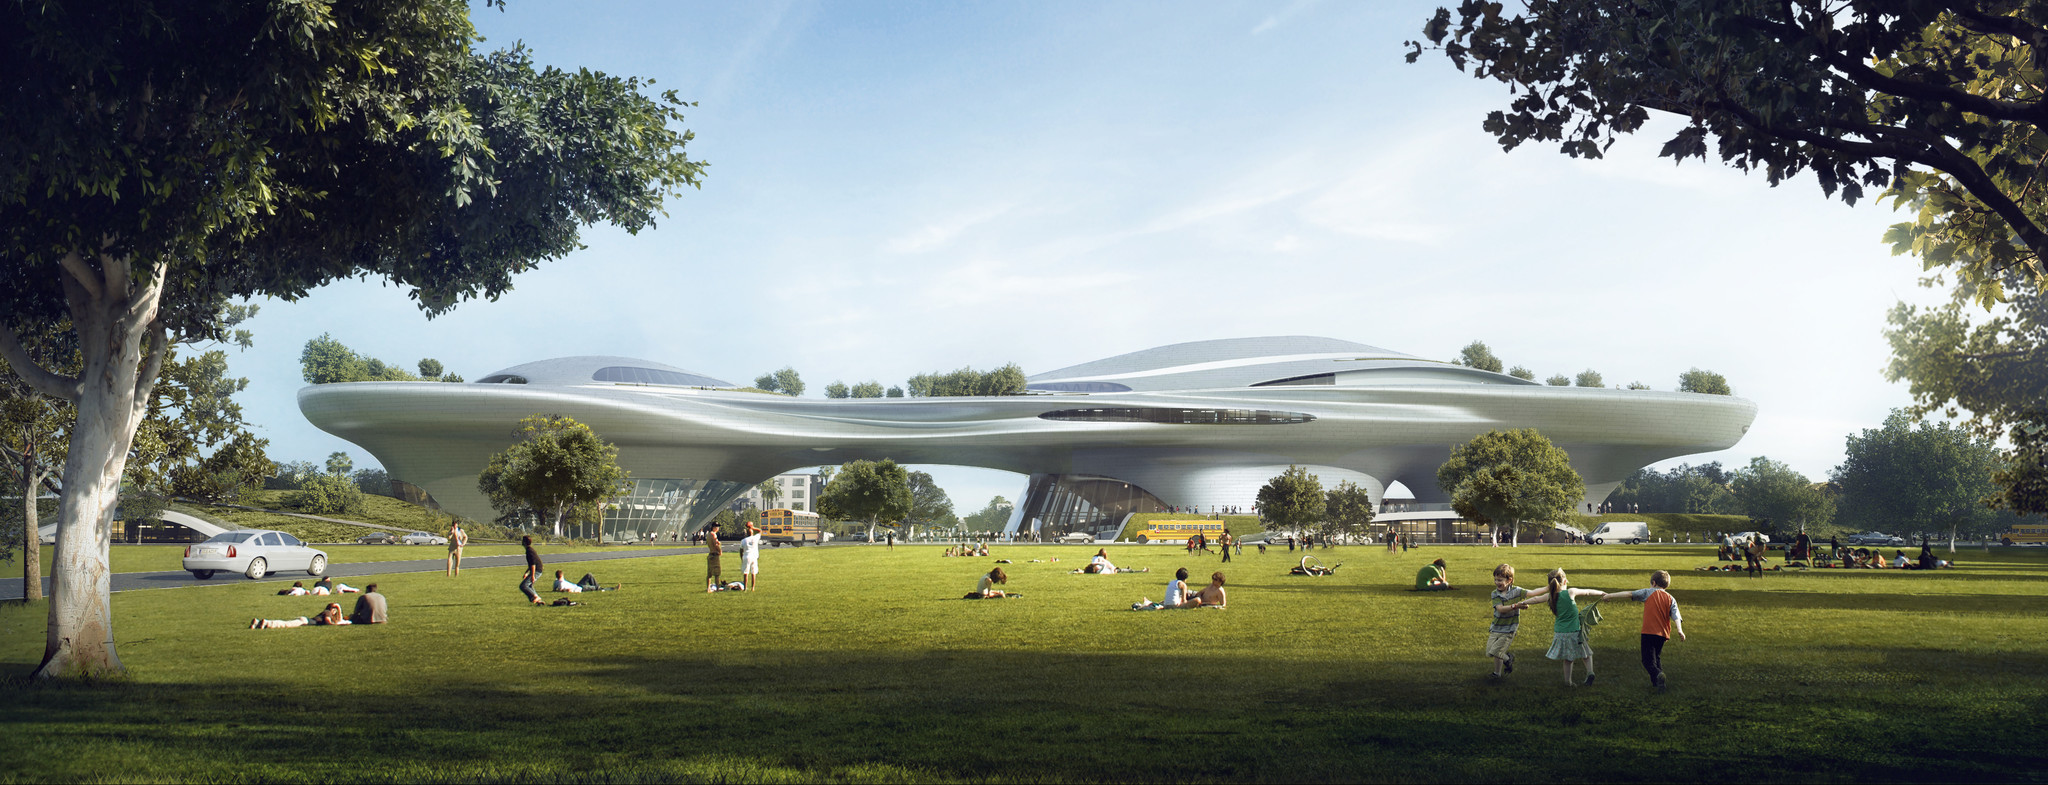 A rendering of architect Ma Yansong's plan for the Lucas Museum of Narrative Art in L.A.'s Exposition Park.